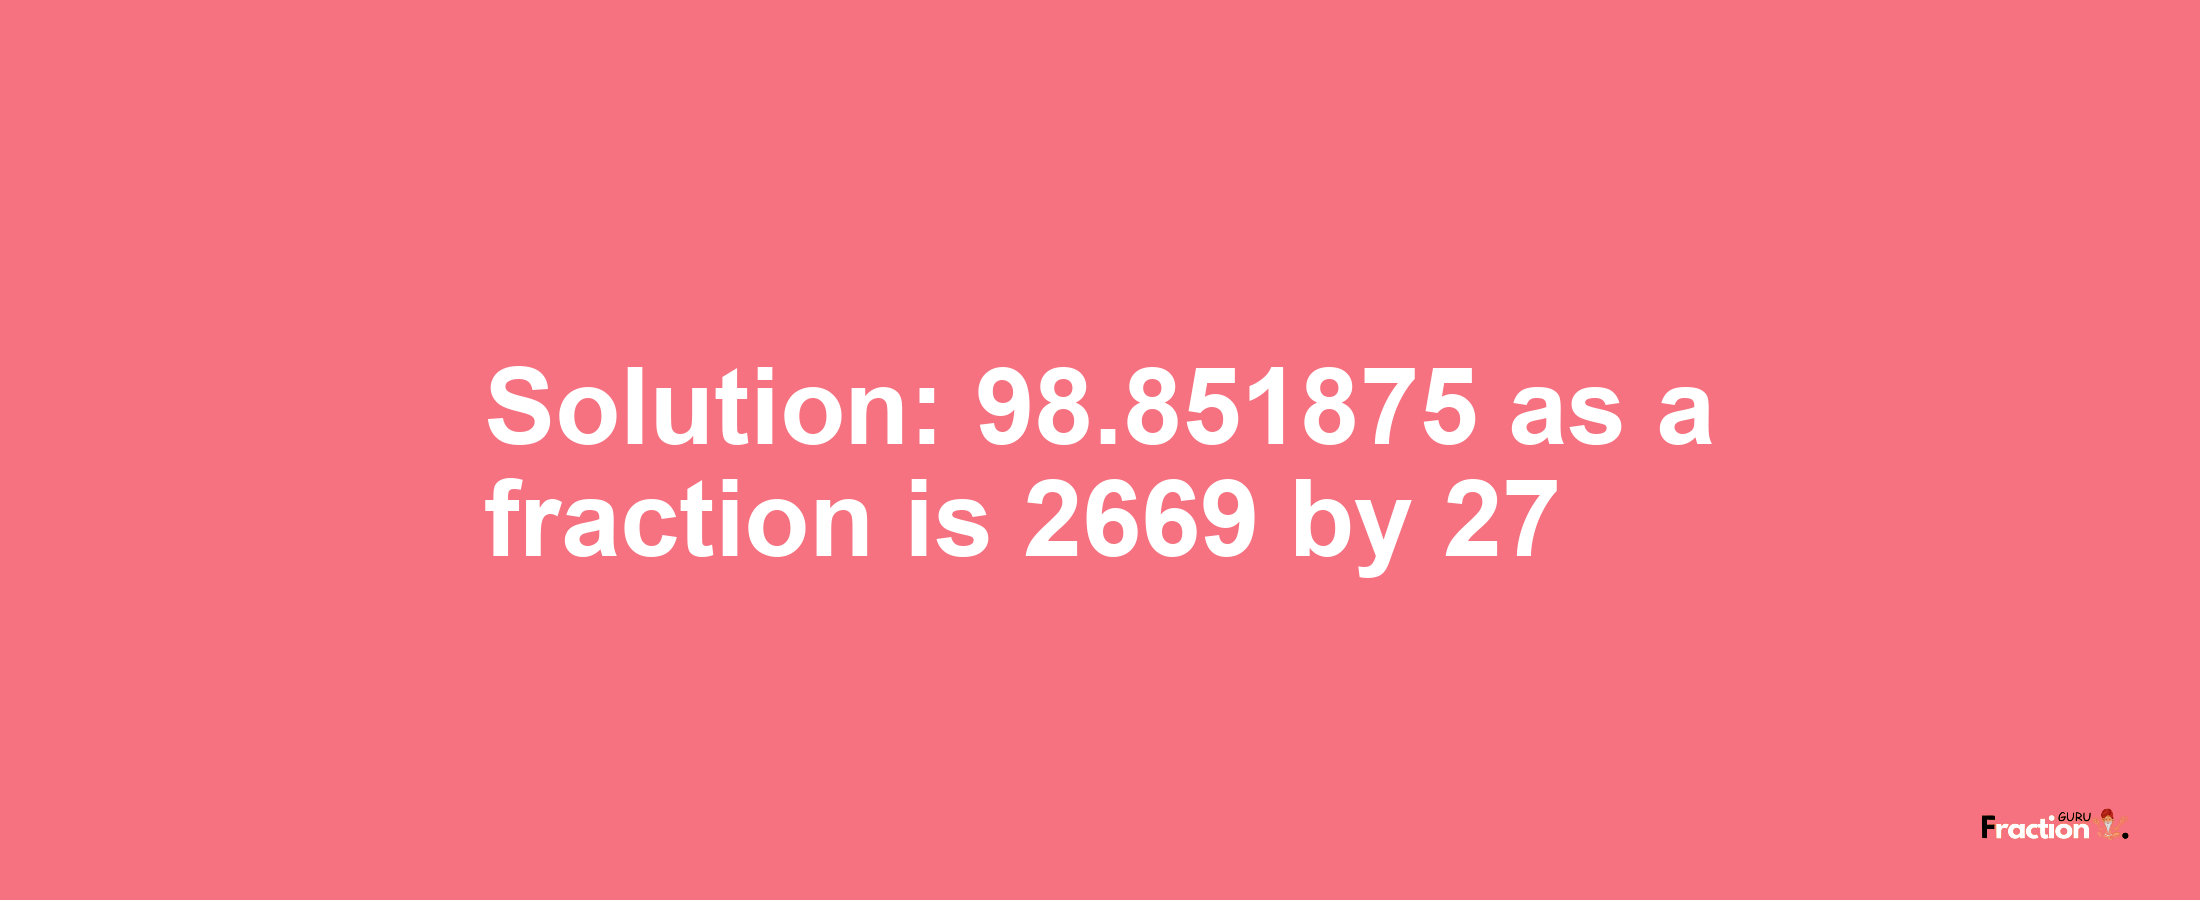 Solution:98.851875 as a fraction is 2669/27